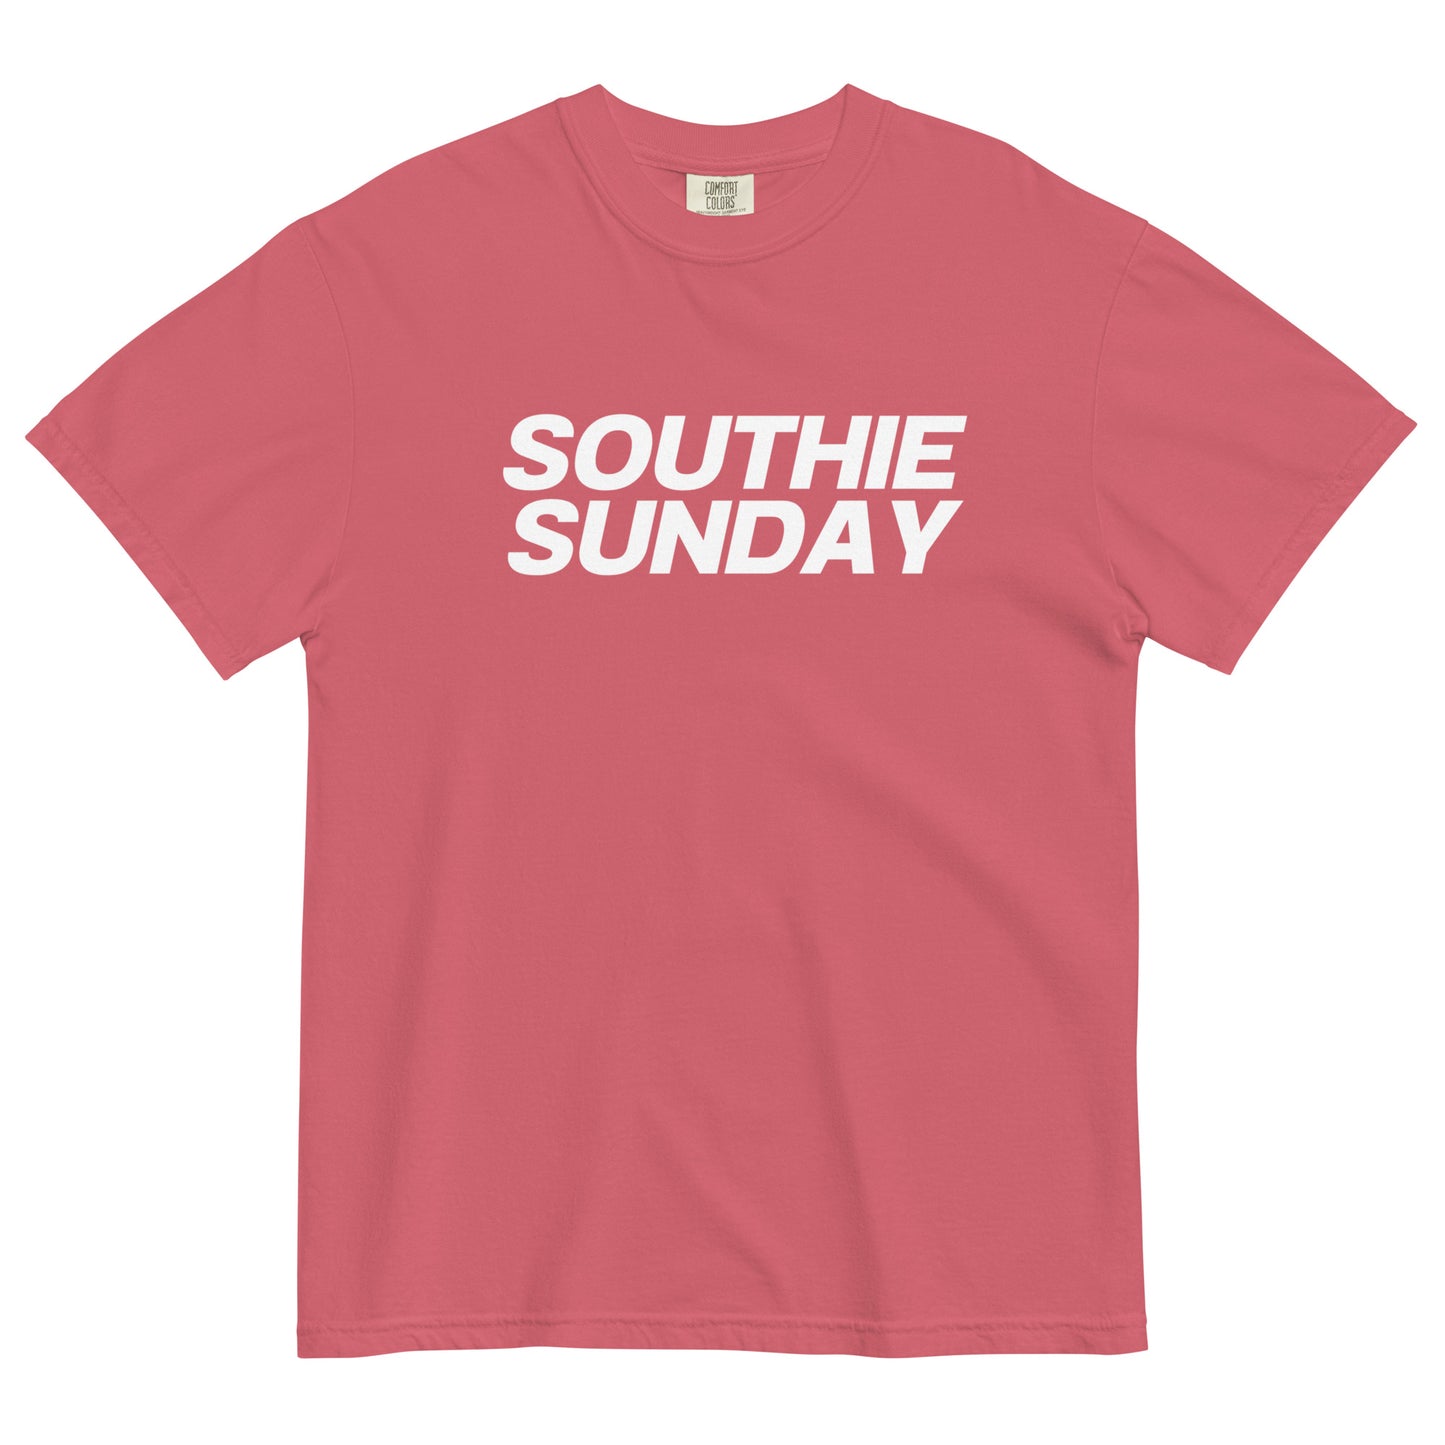 light red tshirt that says "southie sunday" in white lettering